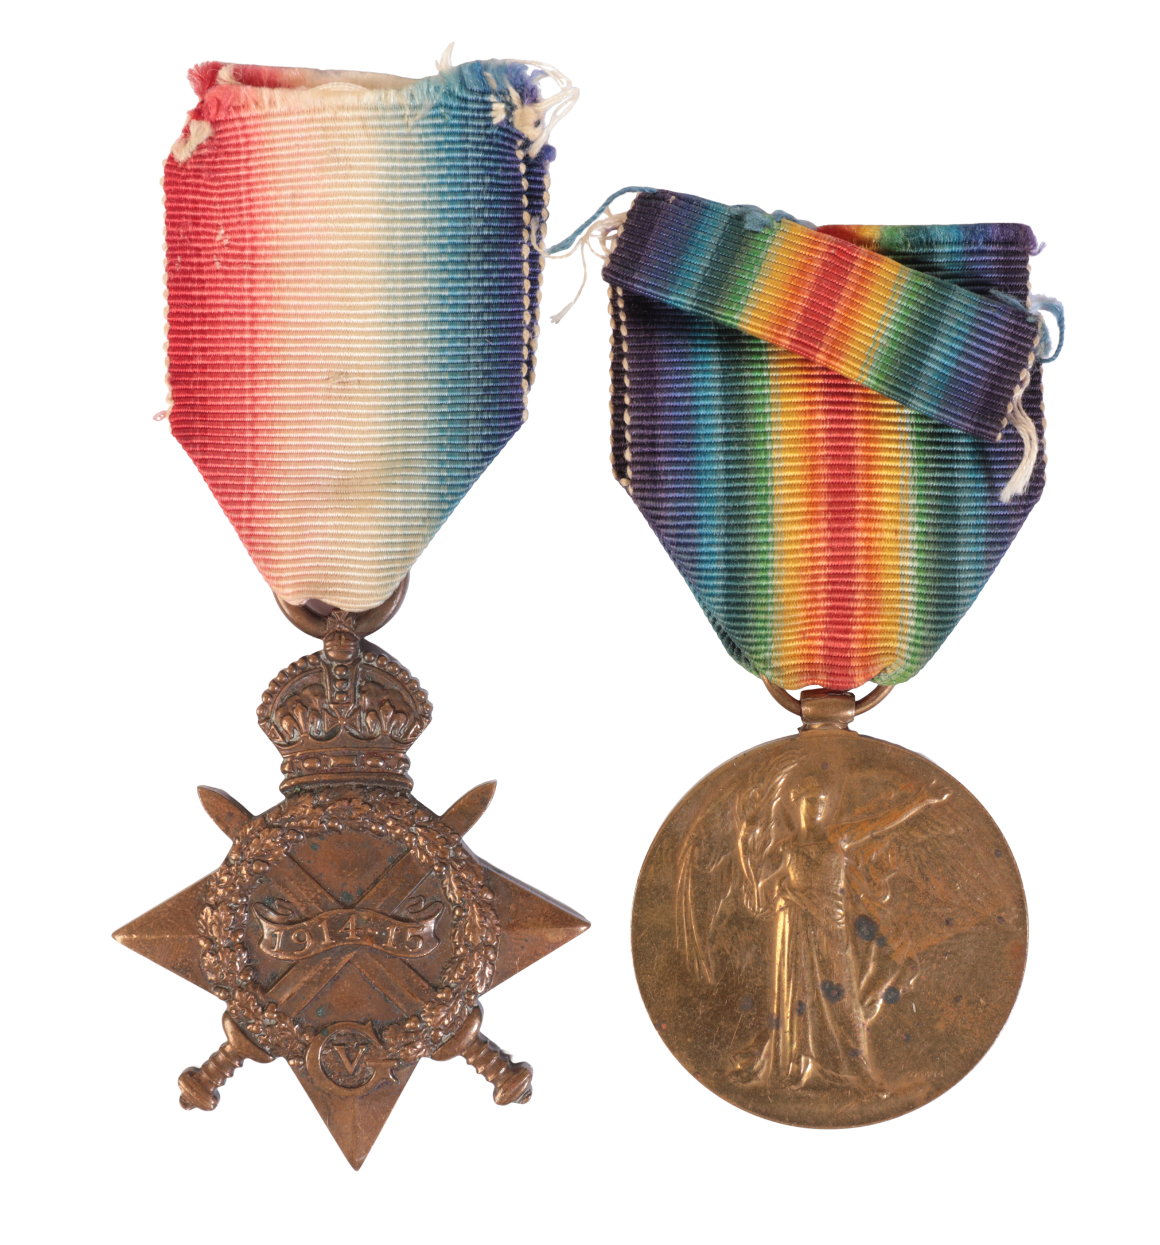 1914 15 STAR AND VICTORY MEDAL 3add63